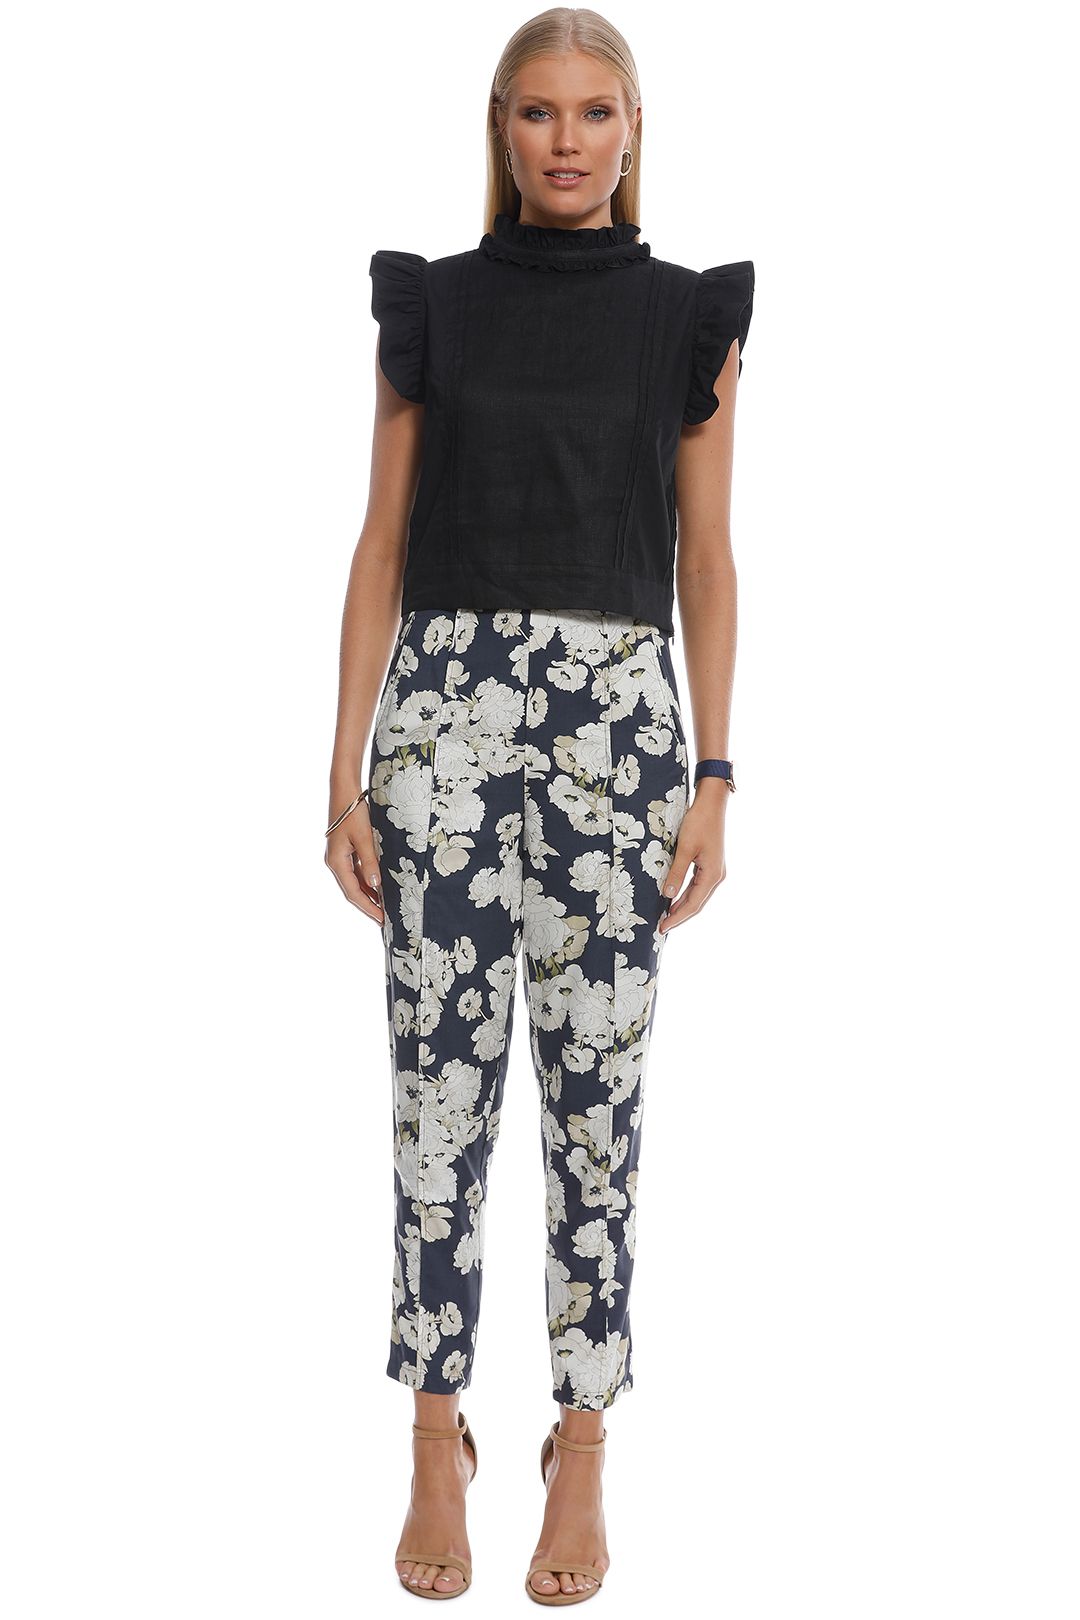 SIR the Label - Bellagio Panelled Pant - Multi - Front